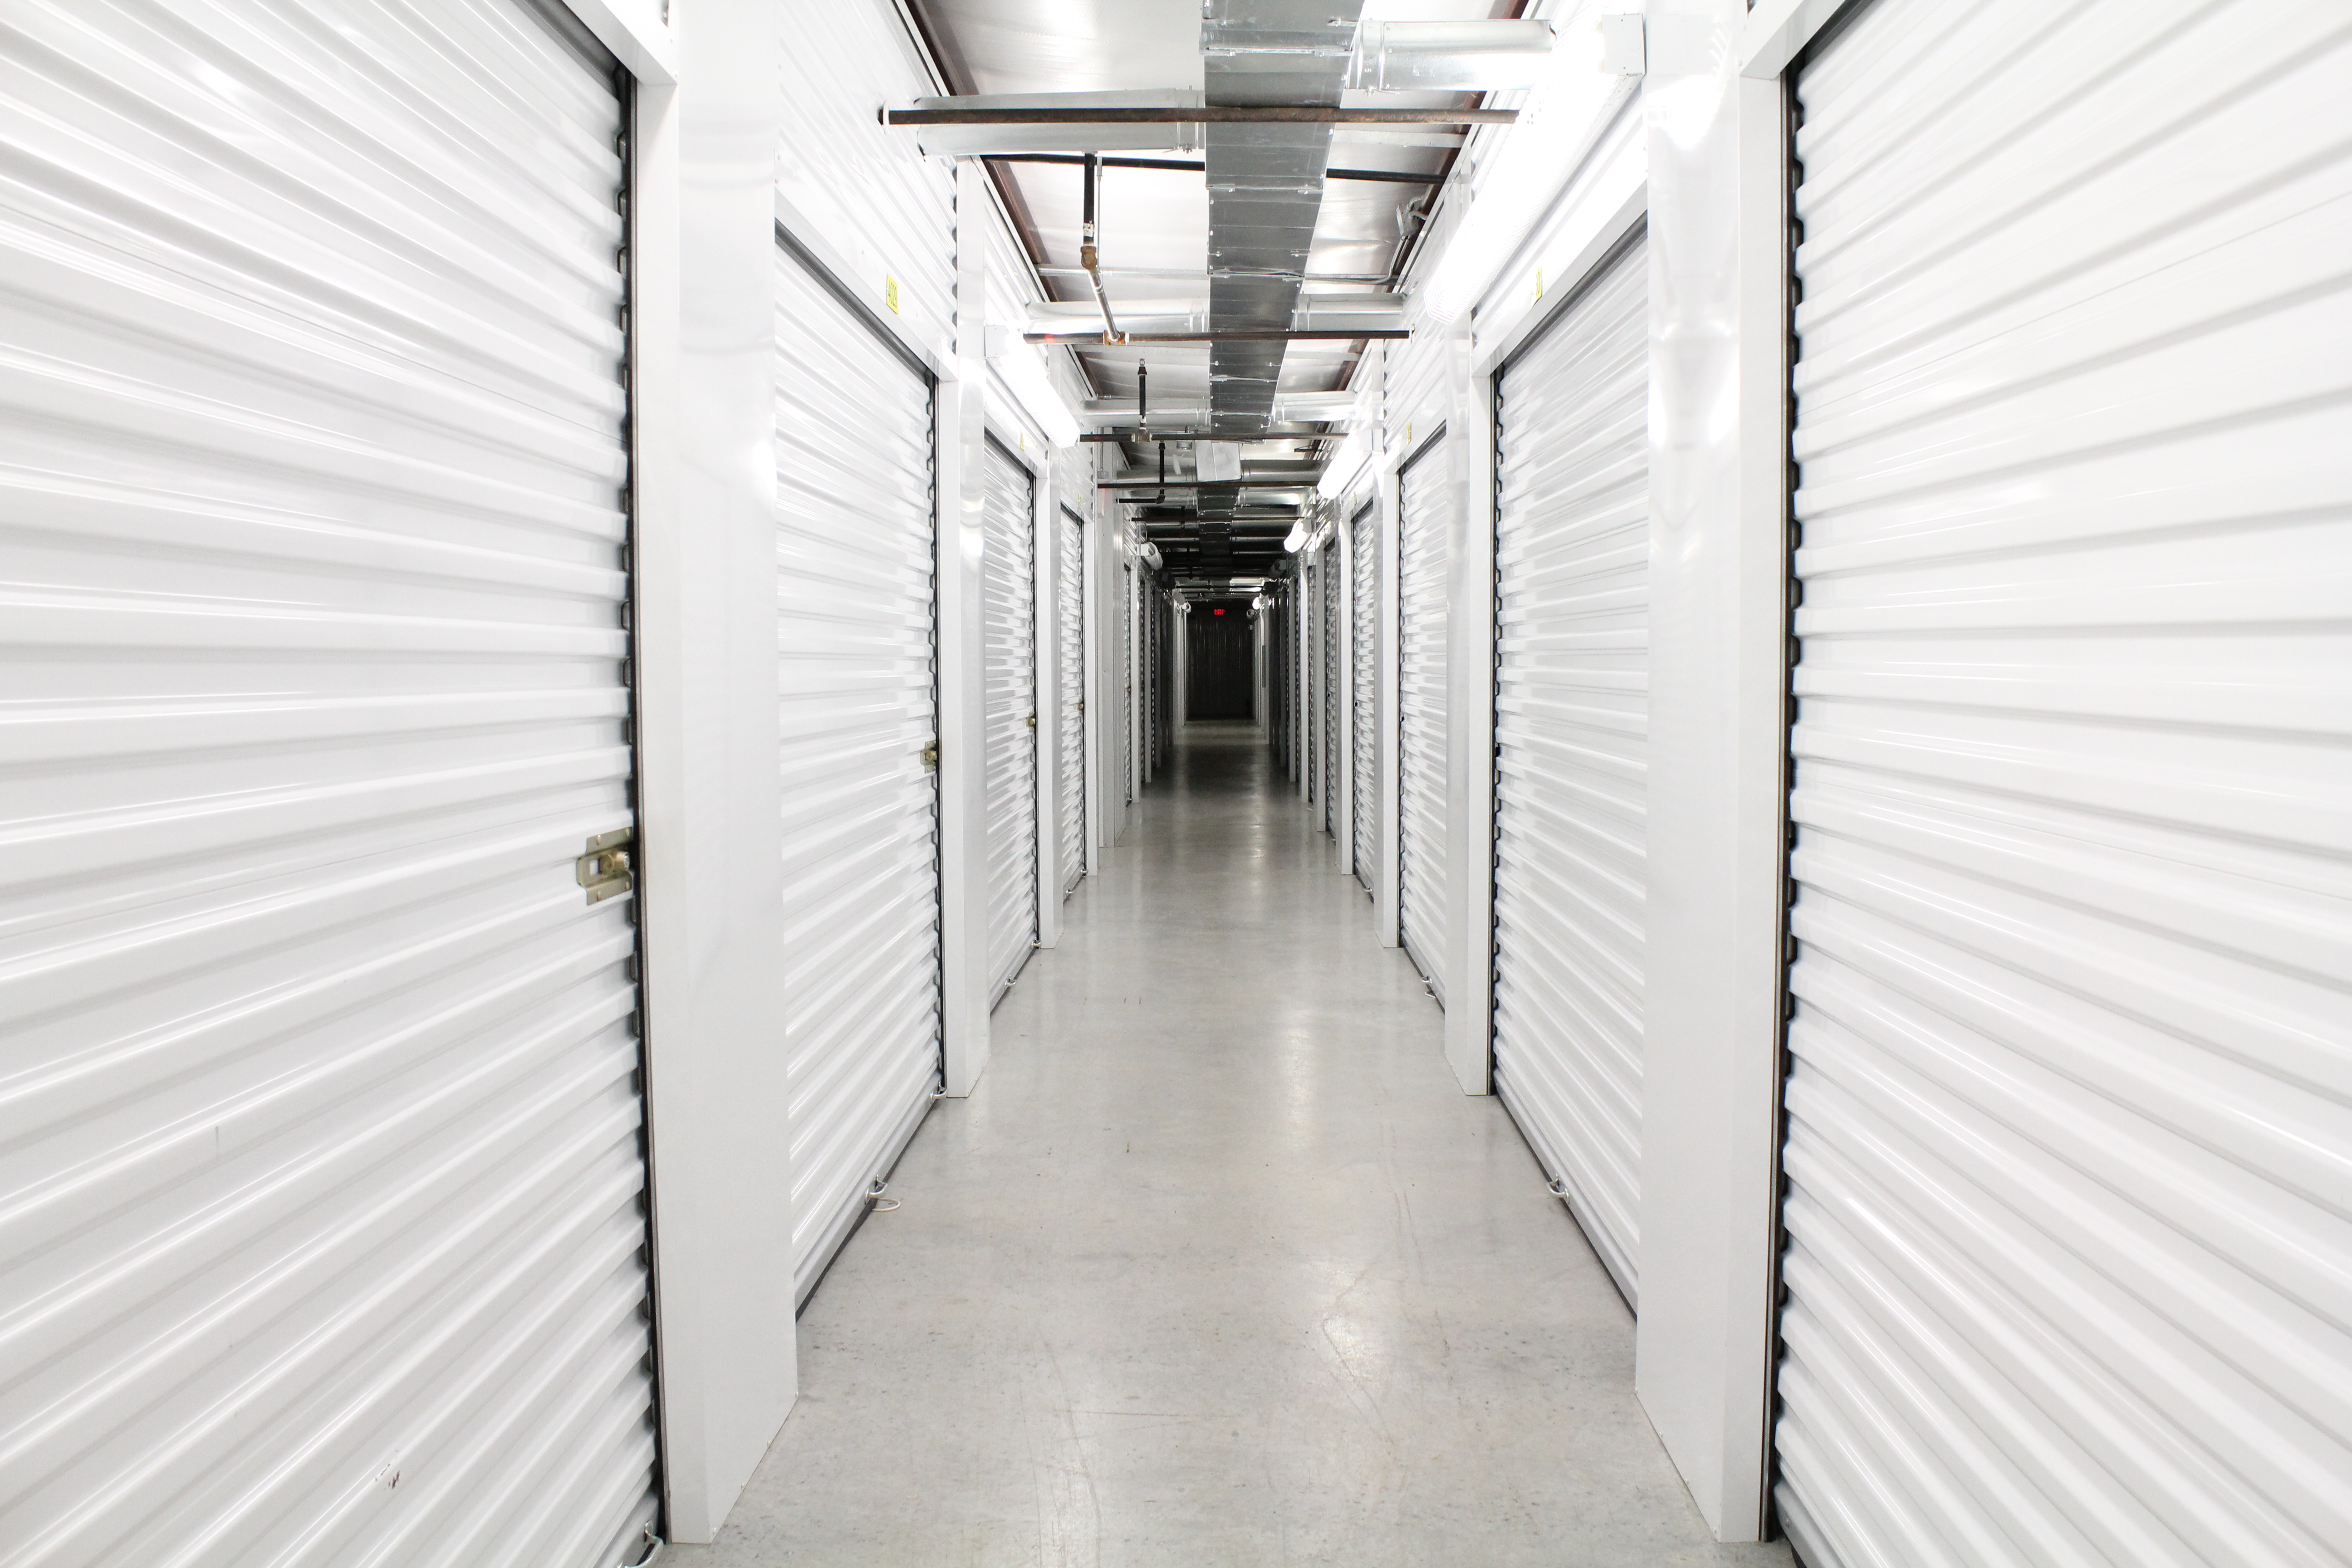 Bright and clean temperature-controlled storage area at Harbor Point Storage in Vero Beach, showing white doors, elevator entry points, and security cameras ensuring top-notch security.